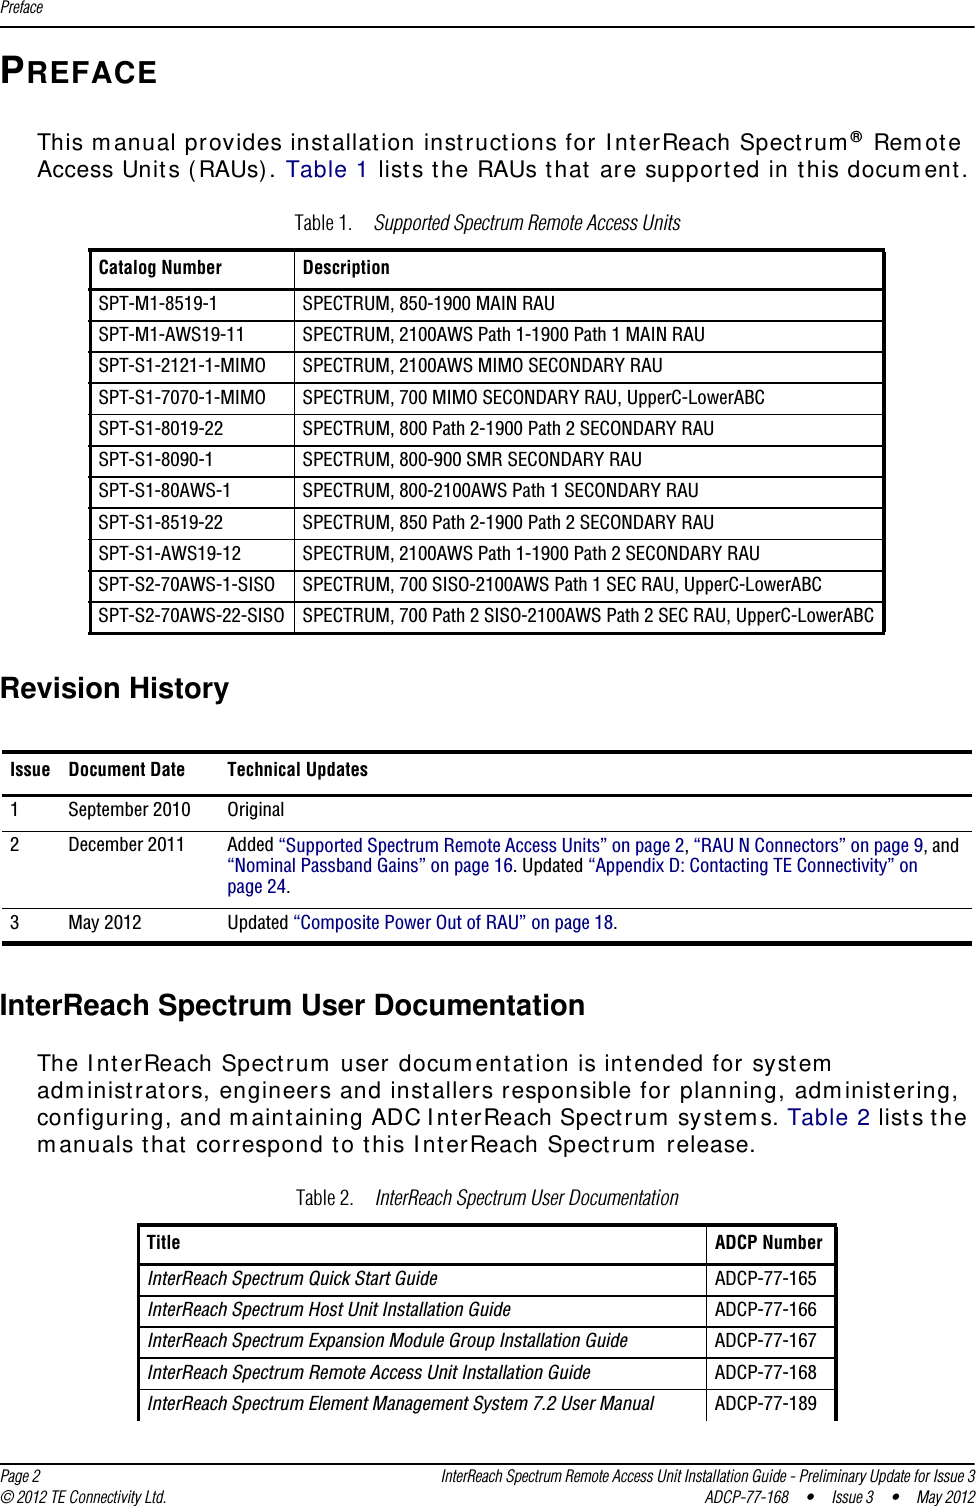 Preface  Page 2 InterReach Spectrum Remote Access Unit Installation Guide - Preliminary Update for Issue 3© 2012 TE Connectivity Ltd. ADCP-77-168 • Issue 3 • May 2012PREFACEThis manual provides installation instructions for InterReach Spectrum® Remote Access Units (RAUs). Table 1 lists the RAUs that are supported in this document.Table 1. Supported Spectrum Remote Access UnitsCatalog Number  DescriptionSPT-M1-8519-1 SPECTRUM, 850-1900 MAIN RAUSPT-M1-AWS19-11 SPECTRUM, 2100AWS Path 1-1900 Path 1 MAIN RAU SPT-S1-2121-1-MIMO SPECTRUM, 2100AWS MIMO SECONDARY RAUSPT-S1-7070-1-MIMO SPECTRUM, 700 MIMO SECONDARY RAU, UpperC-LowerABC SPT-S1-8019-22 SPECTRUM, 800 Path 2-1900 Path 2 SECONDARY RAUSPT-S1-8090-1 SPECTRUM, 800-900 SMR SECONDARY RAUSPT-S1-80AWS-1 SPECTRUM, 800-2100AWS Path 1 SECONDARY RAUSPT-S1-8519-22 SPECTRUM, 850 Path 2-1900 Path 2 SECONDARY RAUSPT-S1-AWS19-12 SPECTRUM, 2100AWS Path 1-1900 Path 2 SECONDARY RAU SPT-S2-70AWS-1-SISO SPECTRUM, 700 SISO-2100AWS Path 1 SEC RAU, UpperC-LowerABCSPT-S2-70AWS-22-SISO SPECTRUM, 700 Path 2 SISO-2100AWS Path 2 SEC RAU, UpperC-LowerABCRevision HistoryIssue Document Date Technical Updates1September 2010 Original2December 2011 Added “Supported Spectrum Remote Access Units” on page 2, “RAU N Connectors” on page 9, and “Nominal Passband Gains” on page 16. Updated “Appendix D: Contacting TE Connectivity” on page 24.3May 2012 Updated “Composite Power Out of RAU” on page 18.InterReach Spectrum User DocumentationThe InterReach Spectrum user documentation is intended for system administrators, engineers and installers responsible for planning, administering, configuring, and maintaining ADC InterReach Spectrum systems. Table 2 lists the manuals that correspond to this InterReach Spectrum release.Table 2. InterReach Spectrum User DocumentationTitle ADCP Number InterReach Spectrum Quick Start Guide ADCP-77-165InterReach Spectrum Host Unit Installation Guide ADCP-77-166InterReach Spectrum Expansion Module Group Installation Guide ADCP-77-167InterReach Spectrum Remote Access Unit Installation Guide ADCP-77-168InterReach Spectrum Element Management System 7.2 User Manual ADCP-77-189